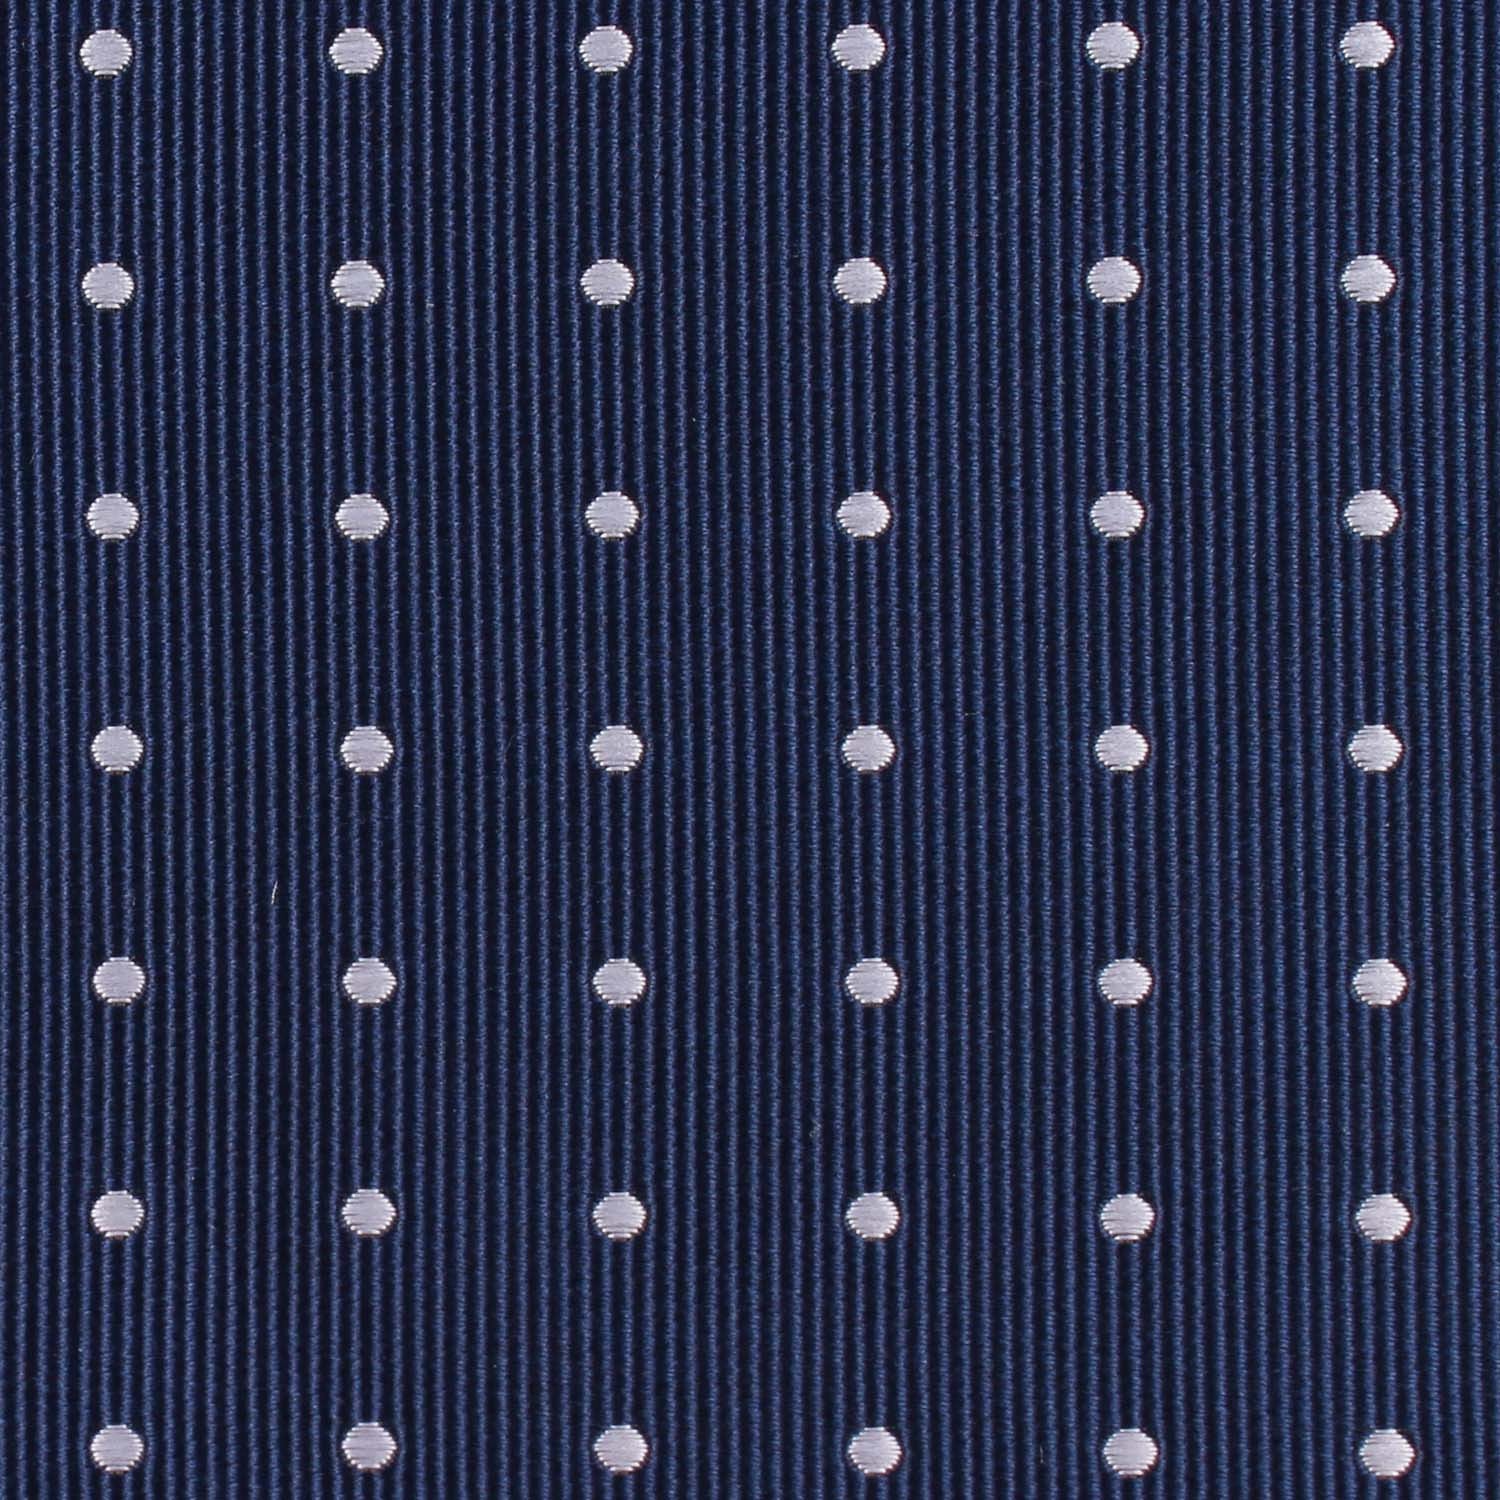 The OTAA Navy Blue with White Polka Dots Fabric Self Tie Bow Tie M131